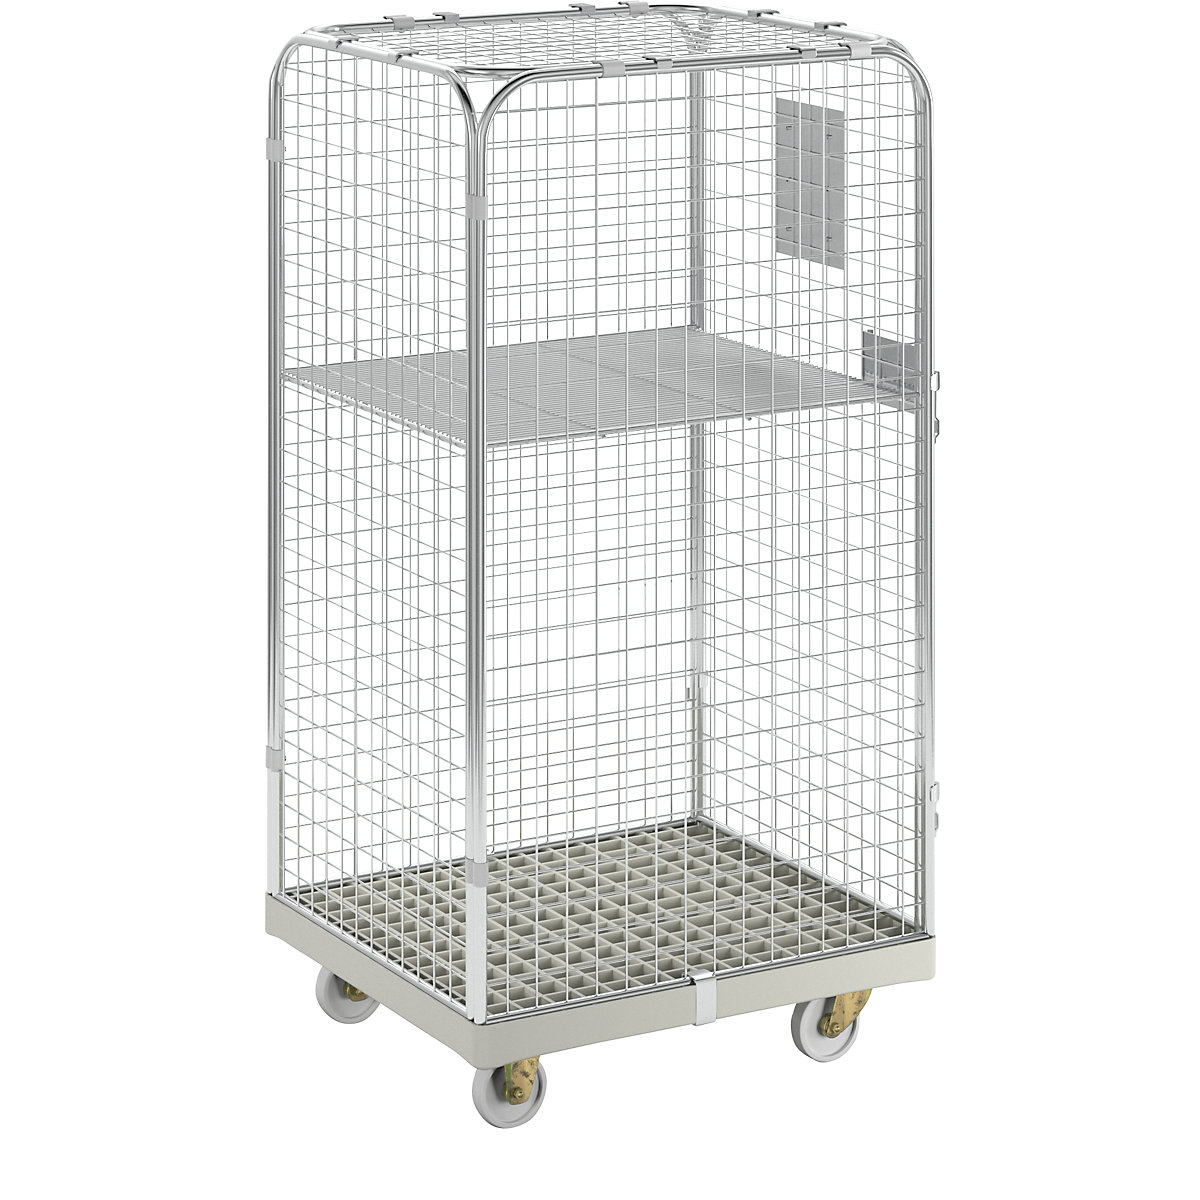 SAFE roll container, HxWxD 1550 x 720 x 810 mm, grey transport dolly-12